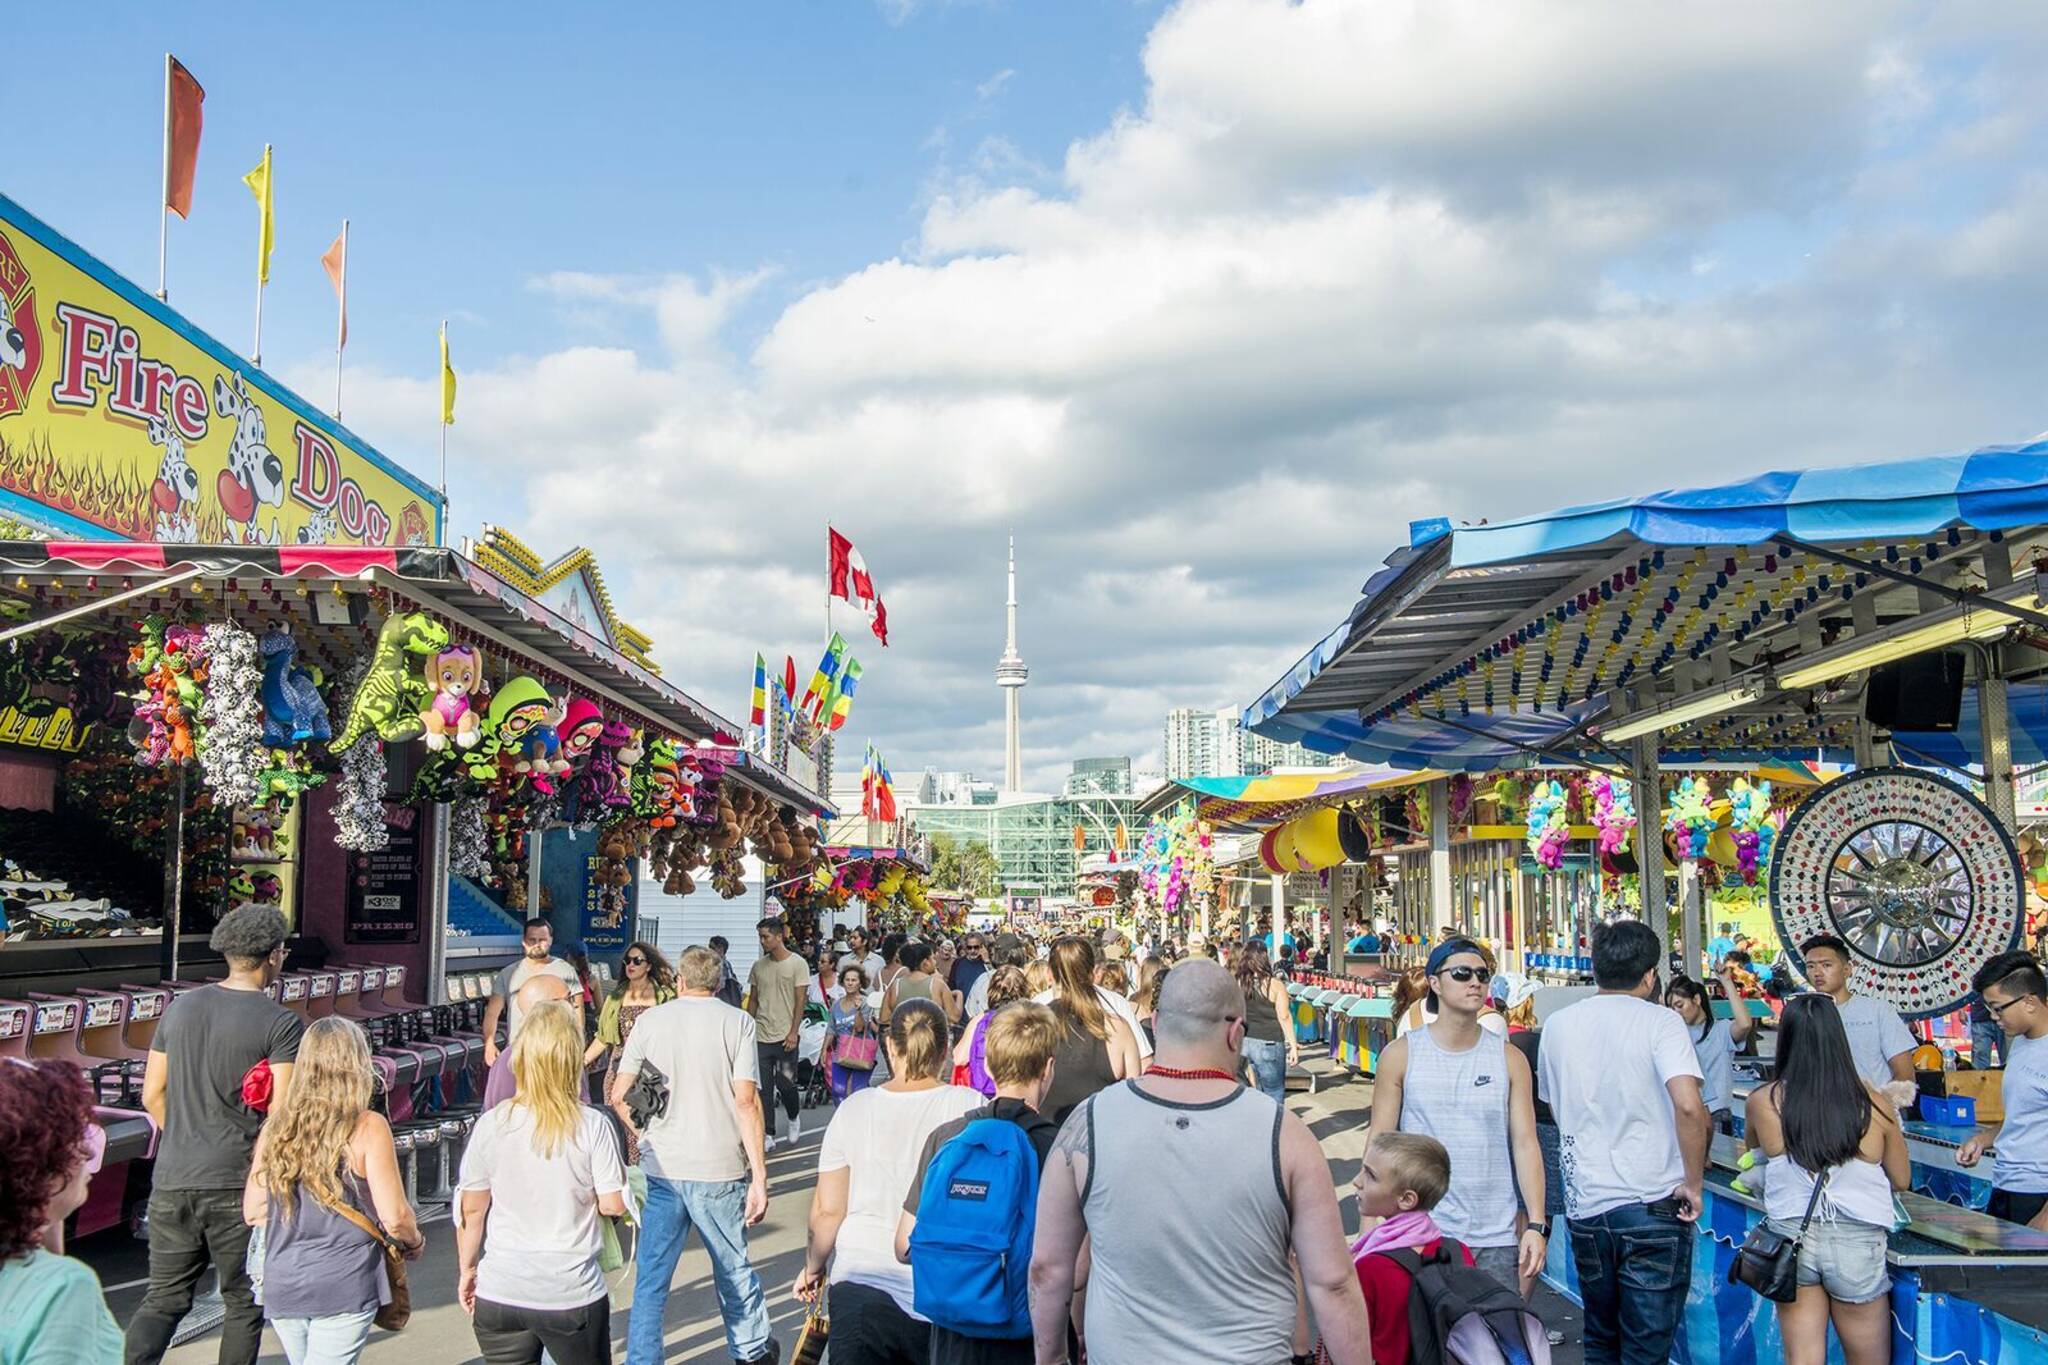 The CNE in Toronto is officially cancelled for 2020